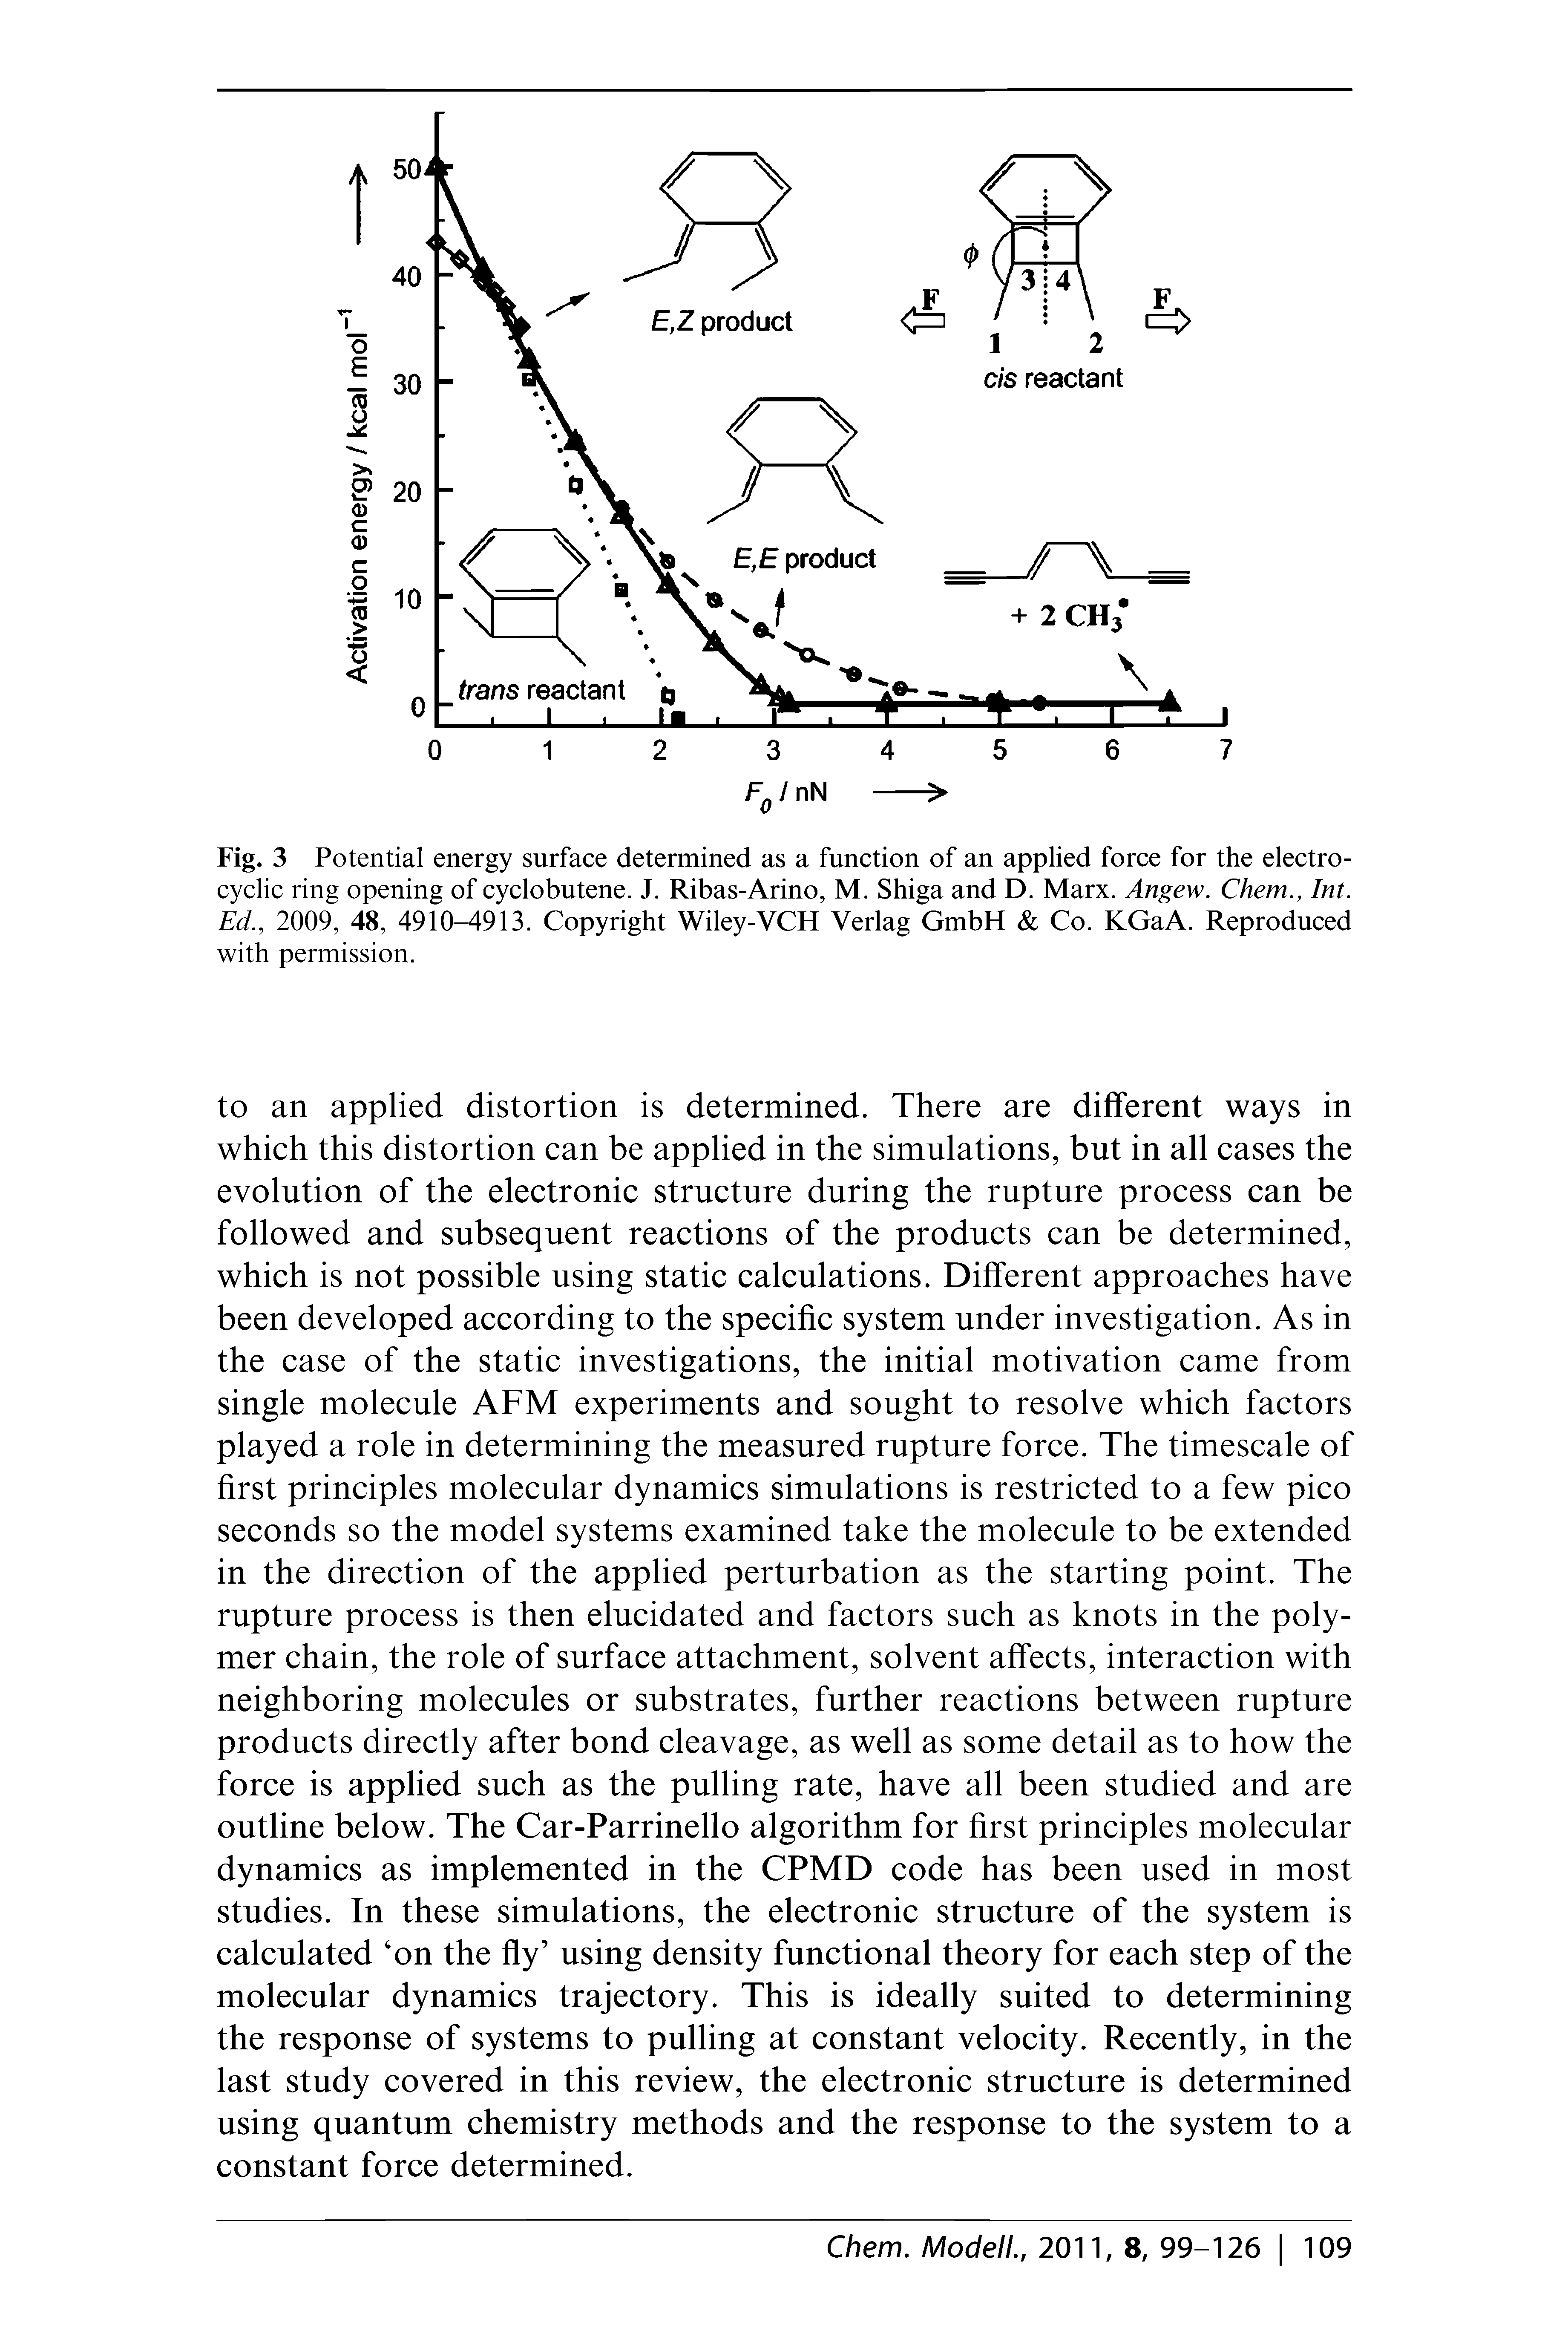 Fig. 3 Potential energy surface determined as a function of an applied force for the electro-cyclic ring opening of cyclobutene. J. Ribas-Arino, M. Shiga and D. Marx. Angew. Chem., Int. Ed., 2009, 48, 4910-4913. Copyright Wiley-VCH Verlag GmbH Co. KGaA. Reproduced with permission.